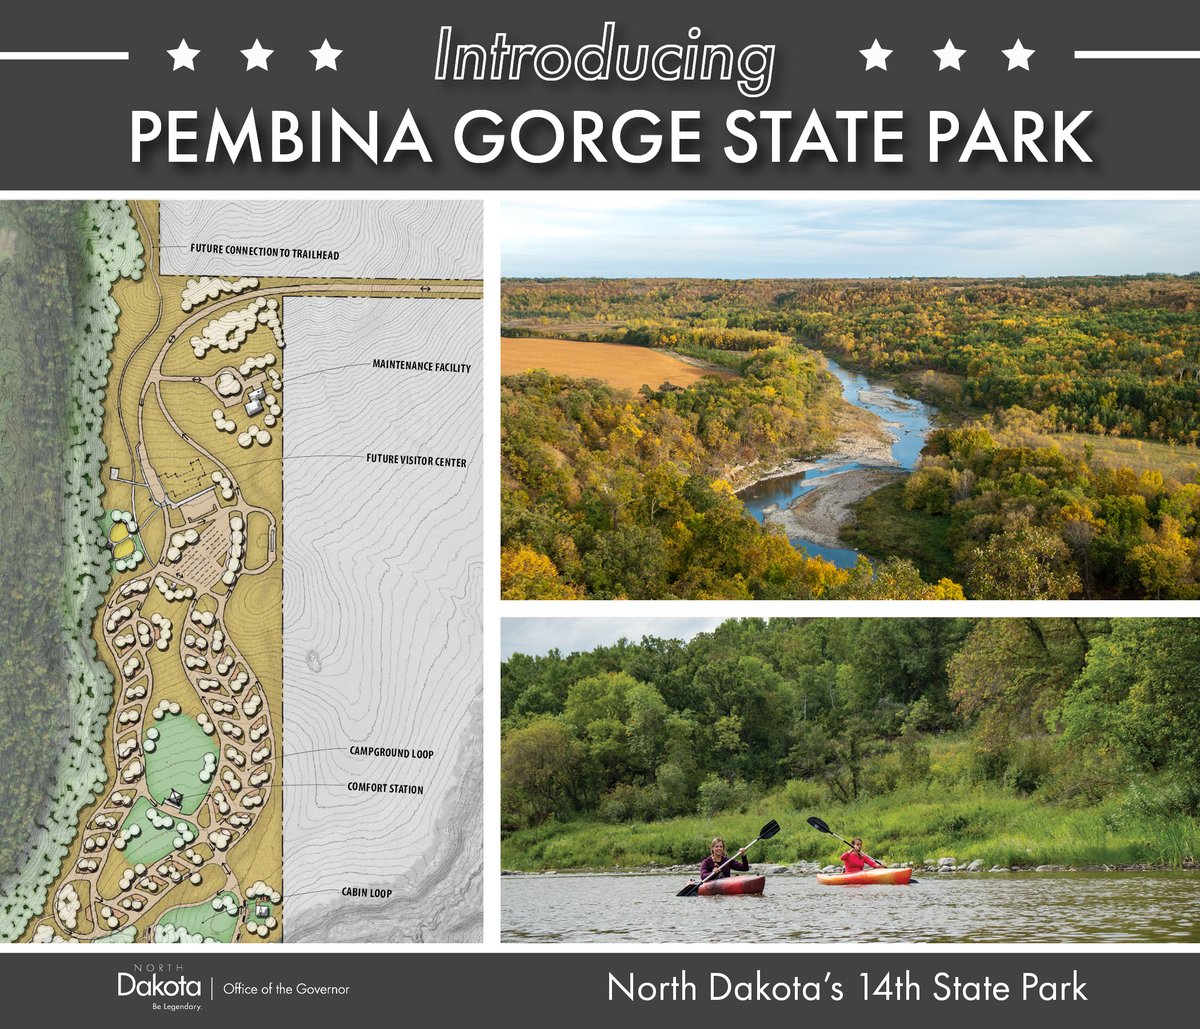 The Pembina Gorge is one of North Dakota's most beautiful areas and now, with secured funding, it will become our 14th state park. Grateful to the Legislature, @NDparkrec and local and regional stakeholders who helped bring this vision to reality. governor.nd.gov/news/burgum-an…